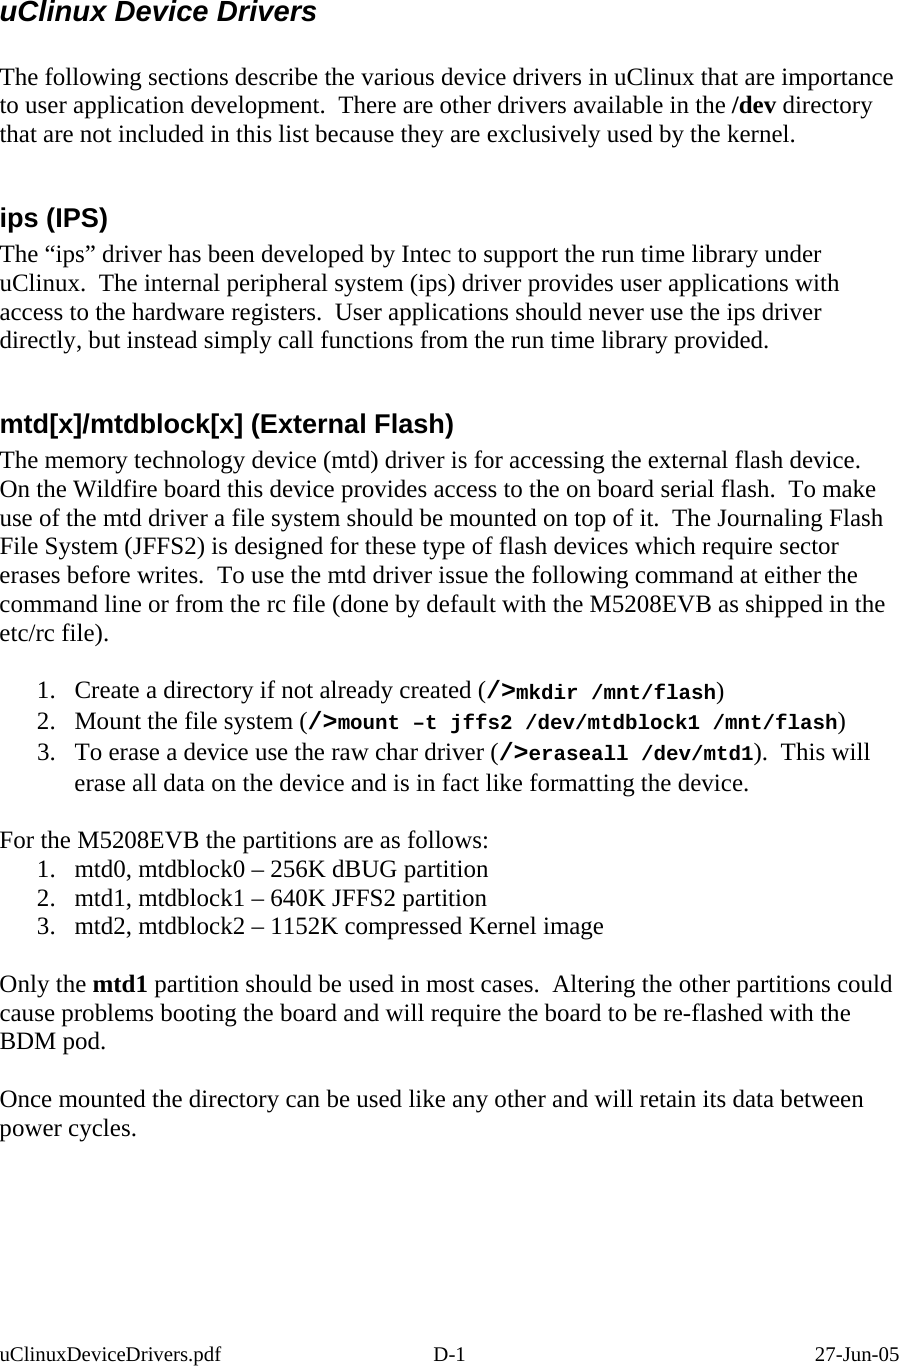  uClinux Device Drivers  The following sections describe the various device drivers in uClinux that are importance to user application development.  There are other drivers available in the /dev directory that are not included in this list because they are exclusively used by the kernel.  ips (IPS) The “ips” driver has been developed by Intec to support the run time library under uClinux.  The internal peripheral system (ips) driver provides user applications with access to the hardware registers.  User applications should never use the ips driver directly, but instead simply call functions from the run time library provided.  mtd[x]/mtdblock[x] (External Flash) The memory technology device (mtd) driver is for accessing the external flash device.   On the Wildfire board this device provides access to the on board serial flash.  To make use of the mtd driver a file system should be mounted on top of it.  The Journaling Flash File System (JFFS2) is designed for these type of flash devices which require sector erases before writes.  To use the mtd driver issue the following command at either the command line or from the rc file (done by default with the M5208EVB as shipped in the etc/rc file).  1.  Create a directory if not already created (/&gt;mkdir /mnt/flash)  2.  Mount the file system (/&gt;mount –t jffs2 /dev/mtdblock1 /mnt/flash) 3.  To erase a device use the raw char driver (/&gt;eraseall /dev/mtd1).  This will erase all data on the device and is in fact like formatting the device.  For the M5208EVB the partitions are as follows: 1.  mtd0, mtdblock0 – 256K dBUG partition 2.  mtd1, mtdblock1 – 640K JFFS2 partition 3.  mtd2, mtdblock2 – 1152K compressed Kernel image  Only the mtd1 partition should be used in most cases.  Altering the other partitions could cause problems booting the board and will require the board to be re-flashed with the BDM pod.  Once mounted the directory can be used like any other and will retain its data between power cycles. uClinuxDeviceDrivers.pdf D-1  27-Jun-05 